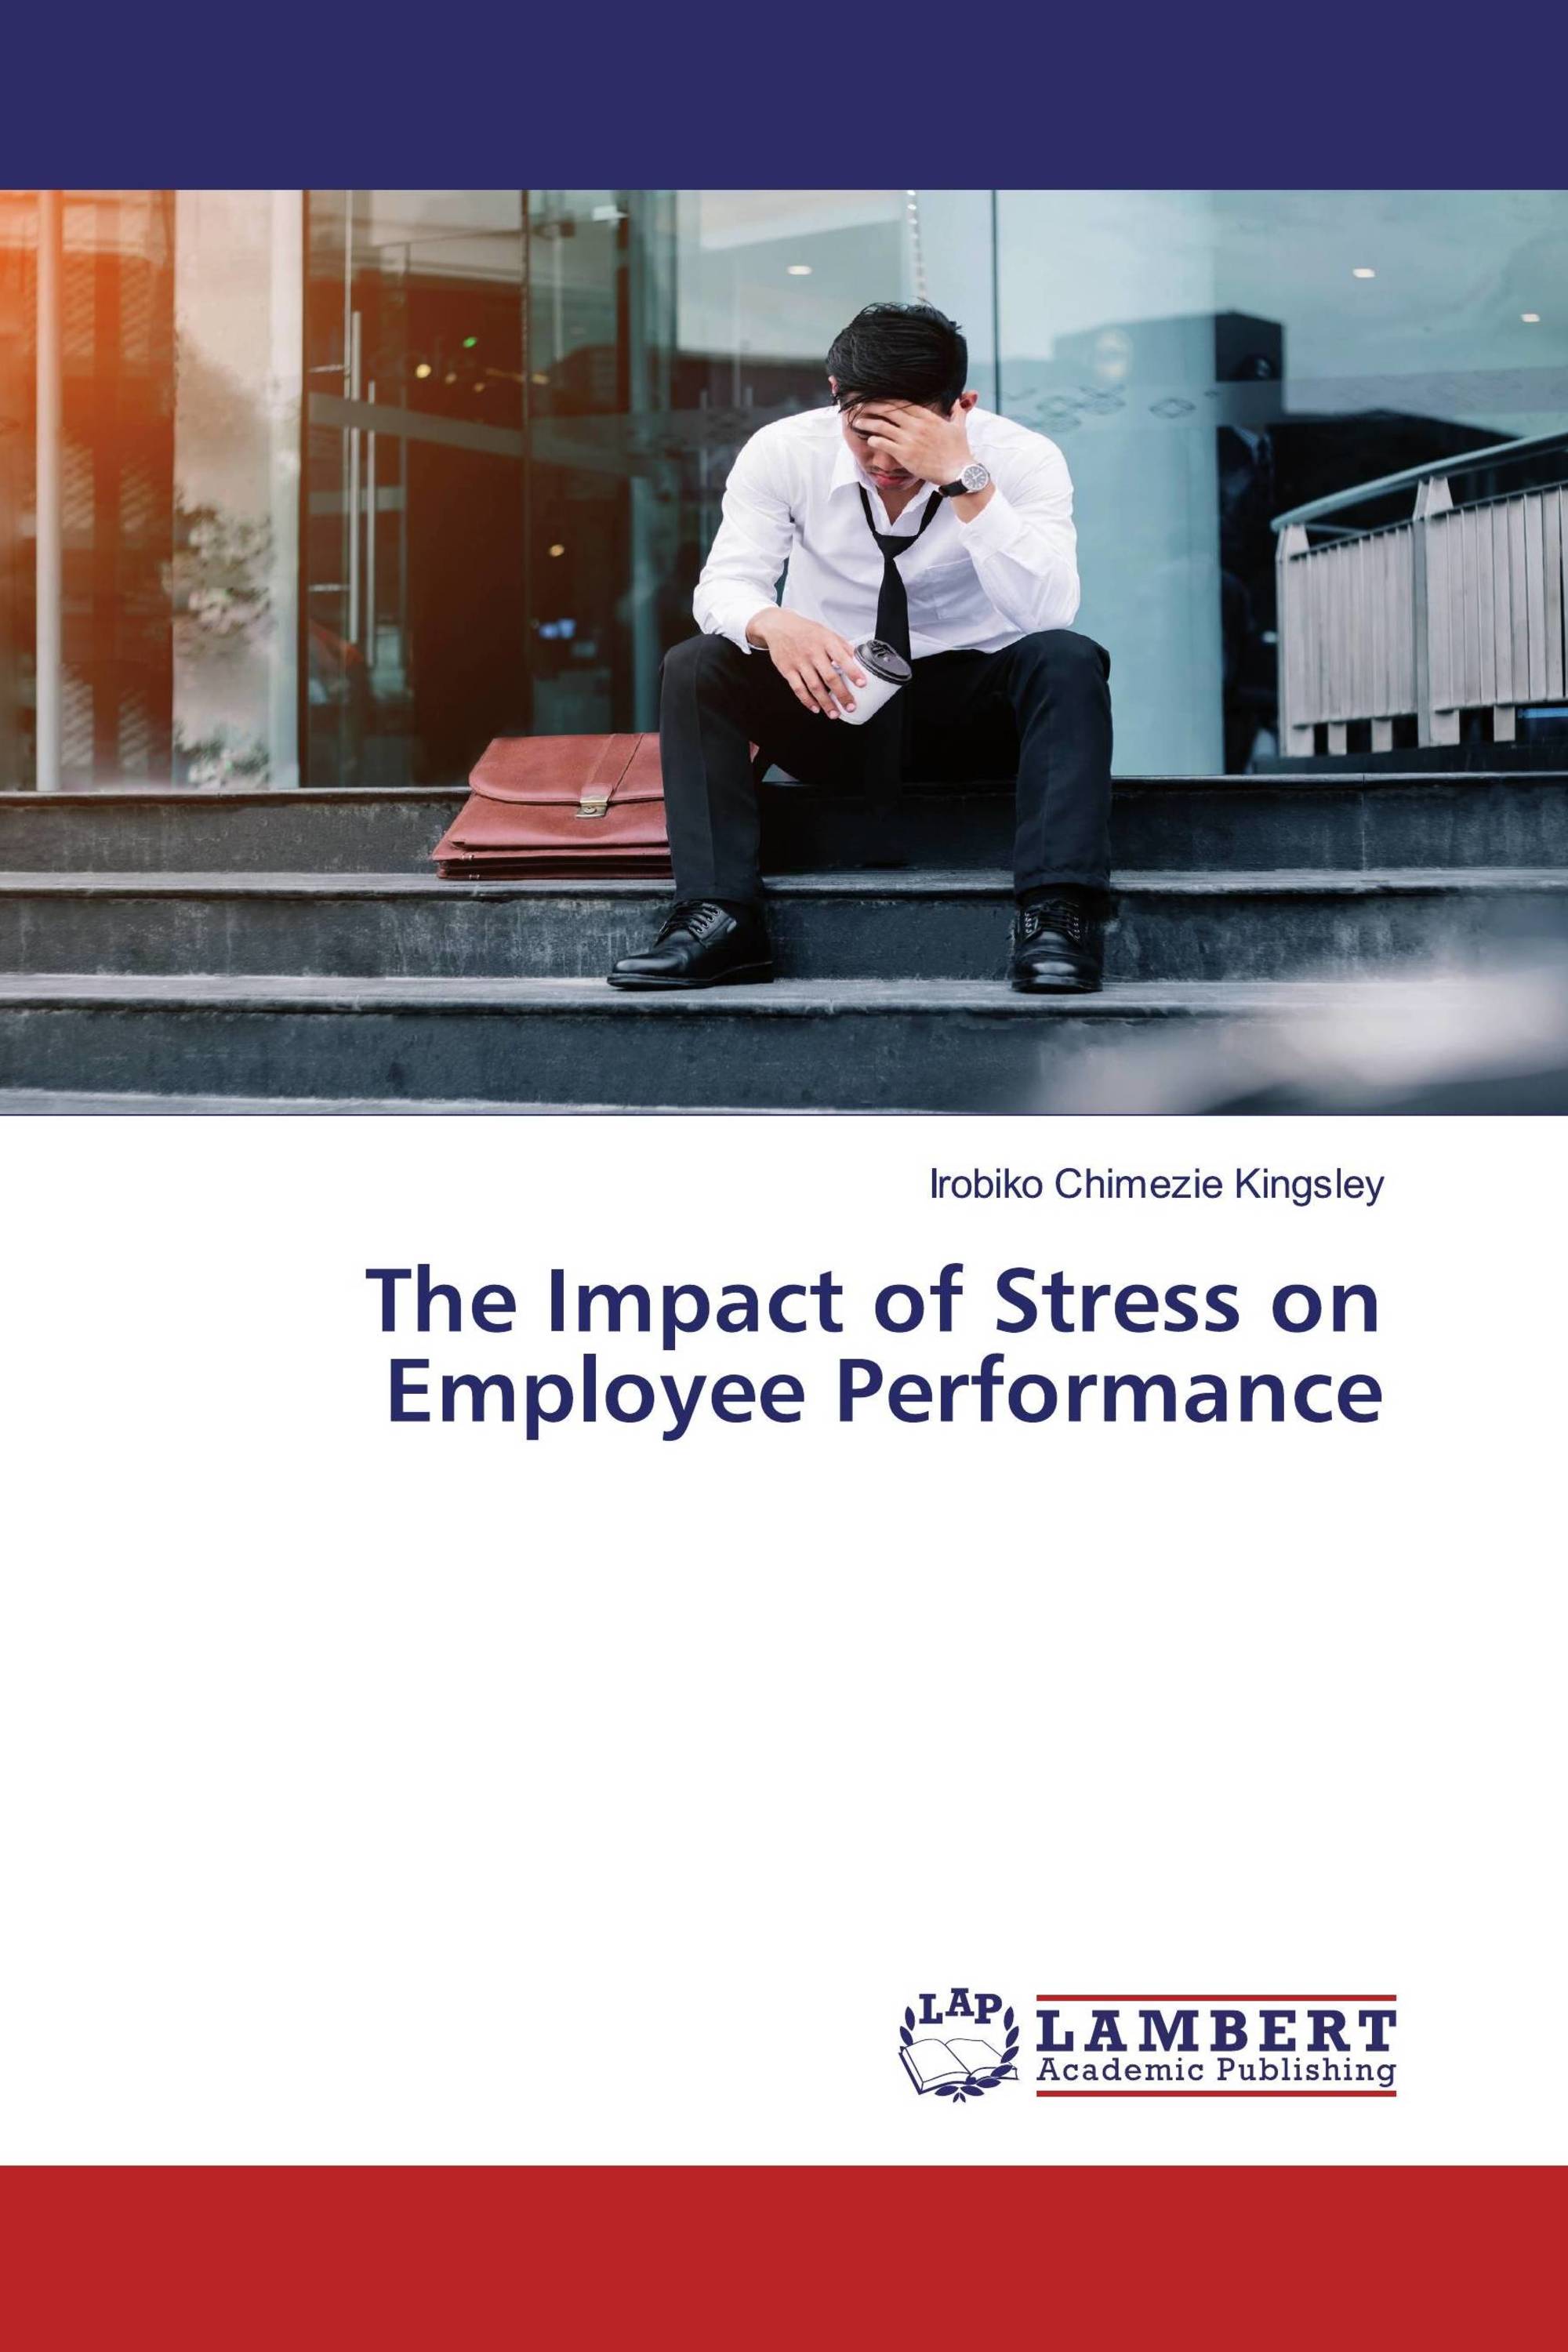 thesis on work stress on employee performance